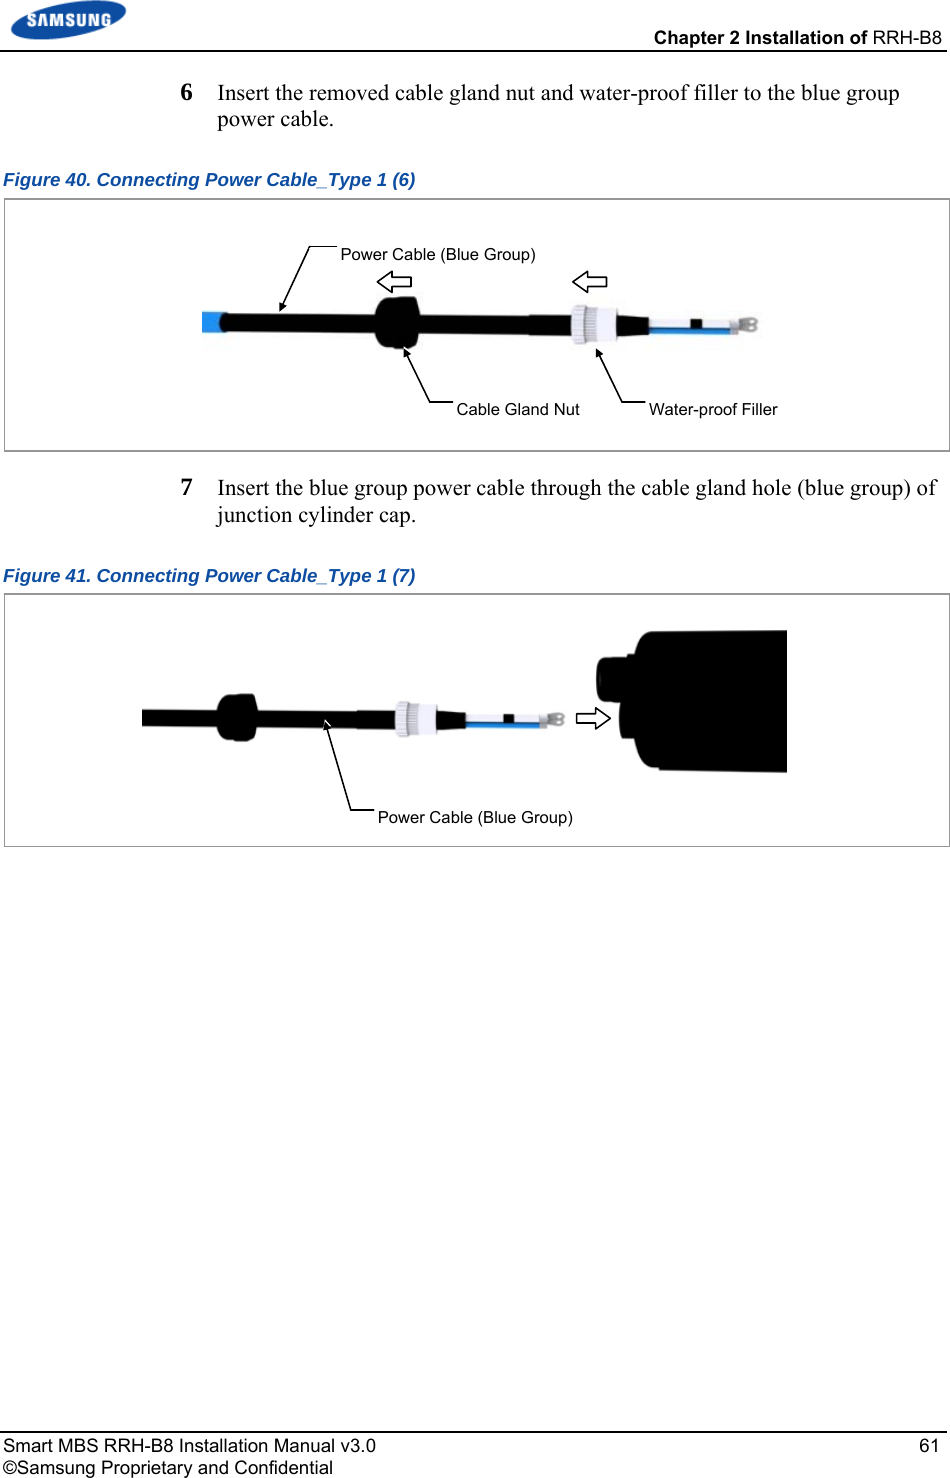  Chapter 2 Installation of RRH-B8 Smart MBS RRH-B8 Installation Manual v3.0   61 ©Samsung Proprietary and Confidential 6  Insert the removed cable gland nut and water-proof filler to the blue group power cable. Figure 40. Connecting Power Cable_Type 1 (6)  7  Insert the blue group power cable through the cable gland hole (blue group) of junction cylinder cap. Figure 41. Connecting Power Cable_Type 1 (7)    Power Cable (Blue Group) Power Cable (Blue Group) Cable Gland Nut  Water-proof Filler 